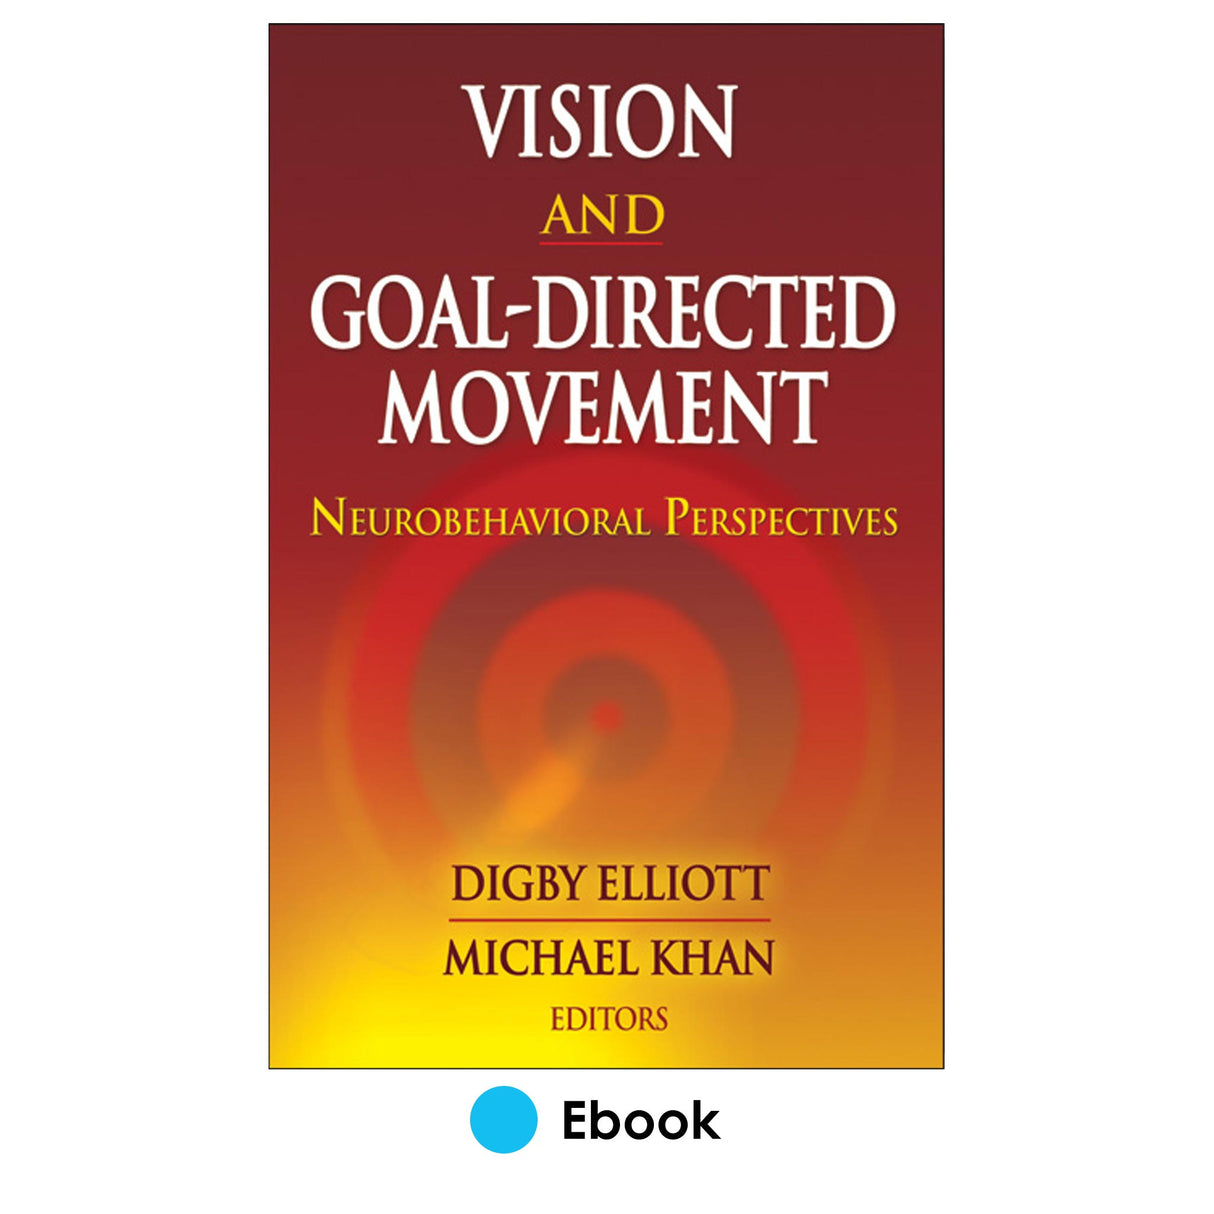 Vision and Goal-Directed Movement PDF